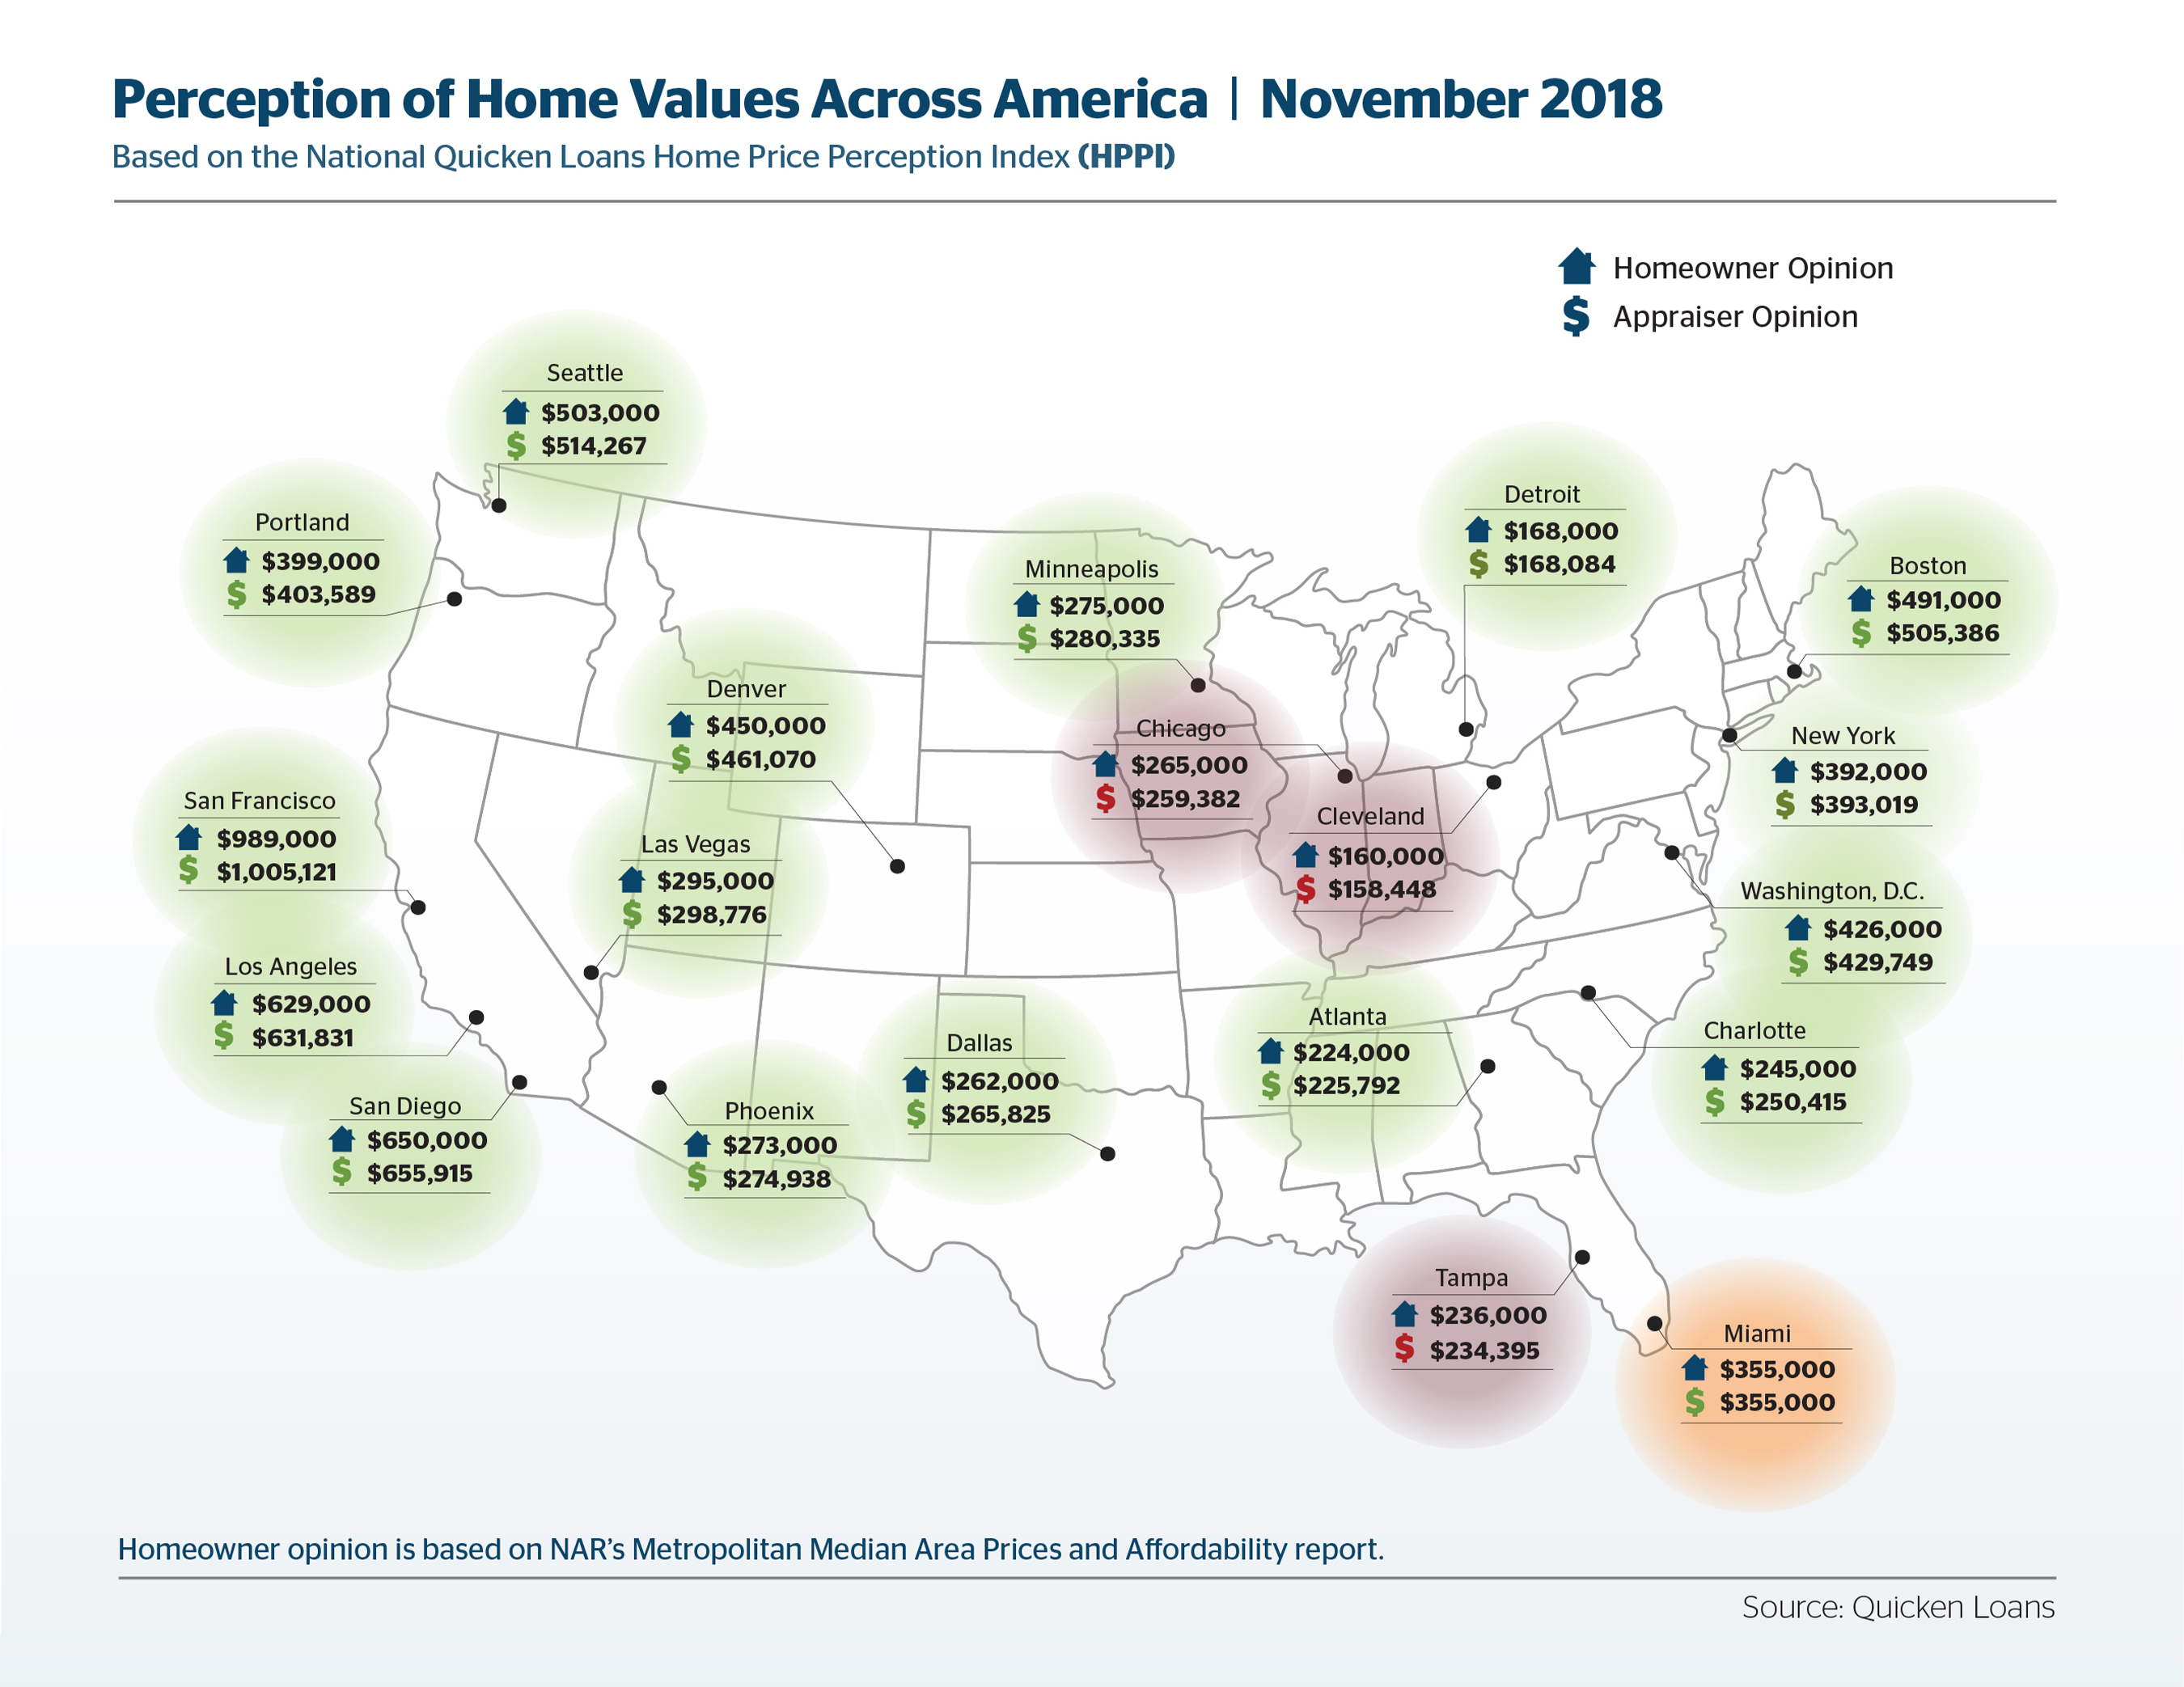 Separately, Quicken Loans reported that October marked the eighth-straight month with less than half a percent difference between appraisals and homeowner estimates